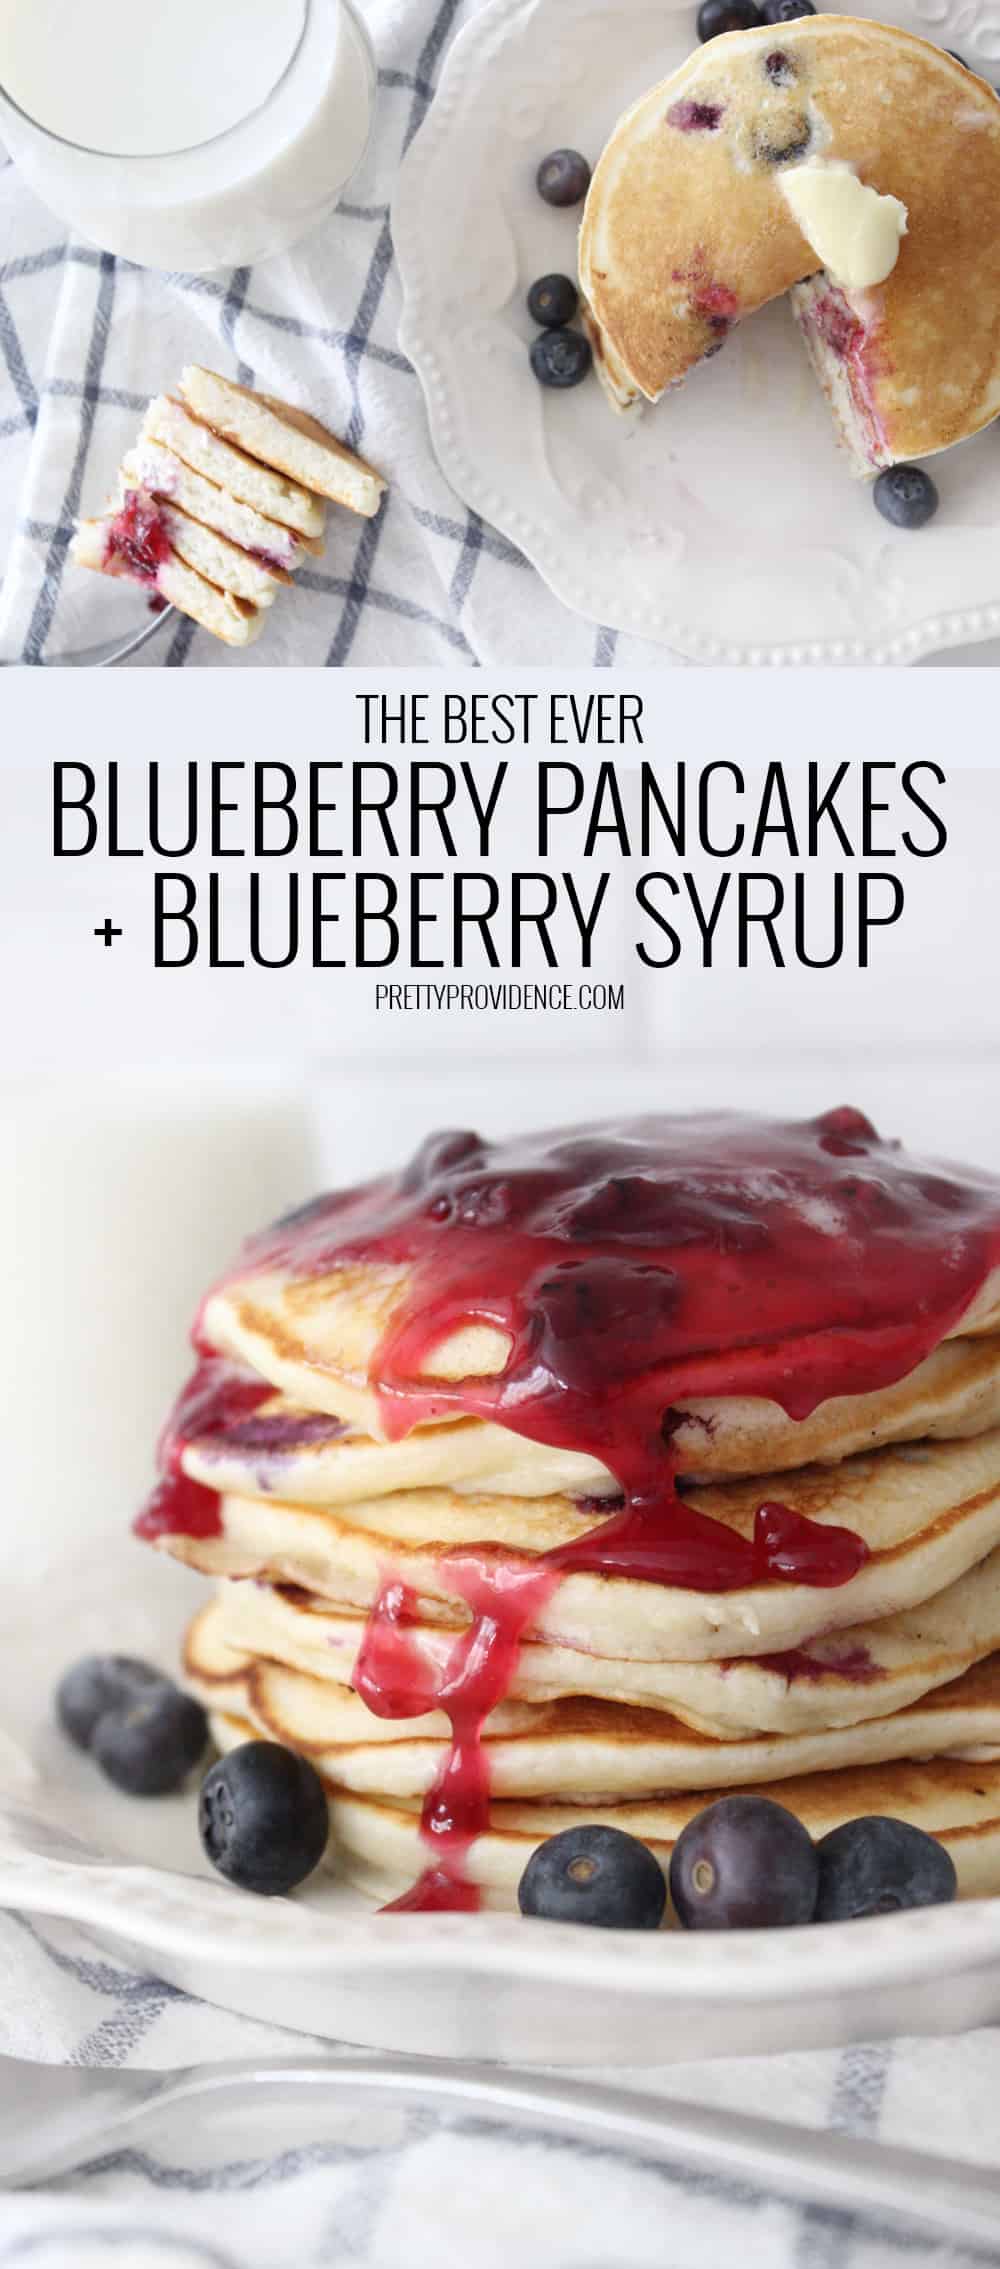 Blueberry Pancakes with Blueberry Syrup